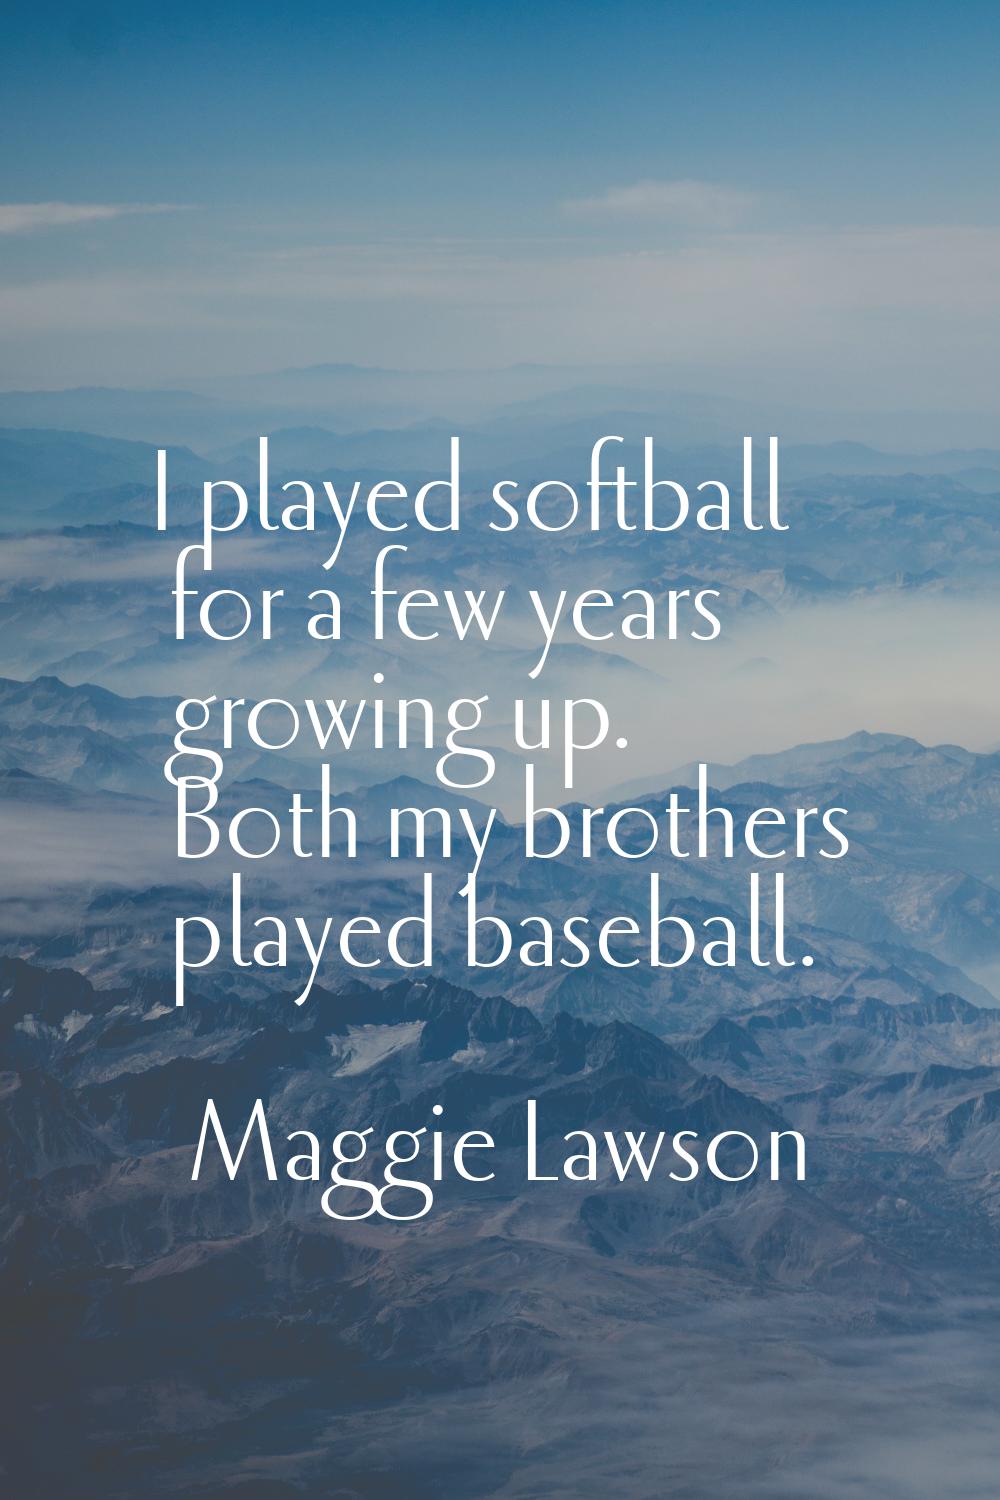 I played softball for a few years growing up. Both my brothers played baseball.